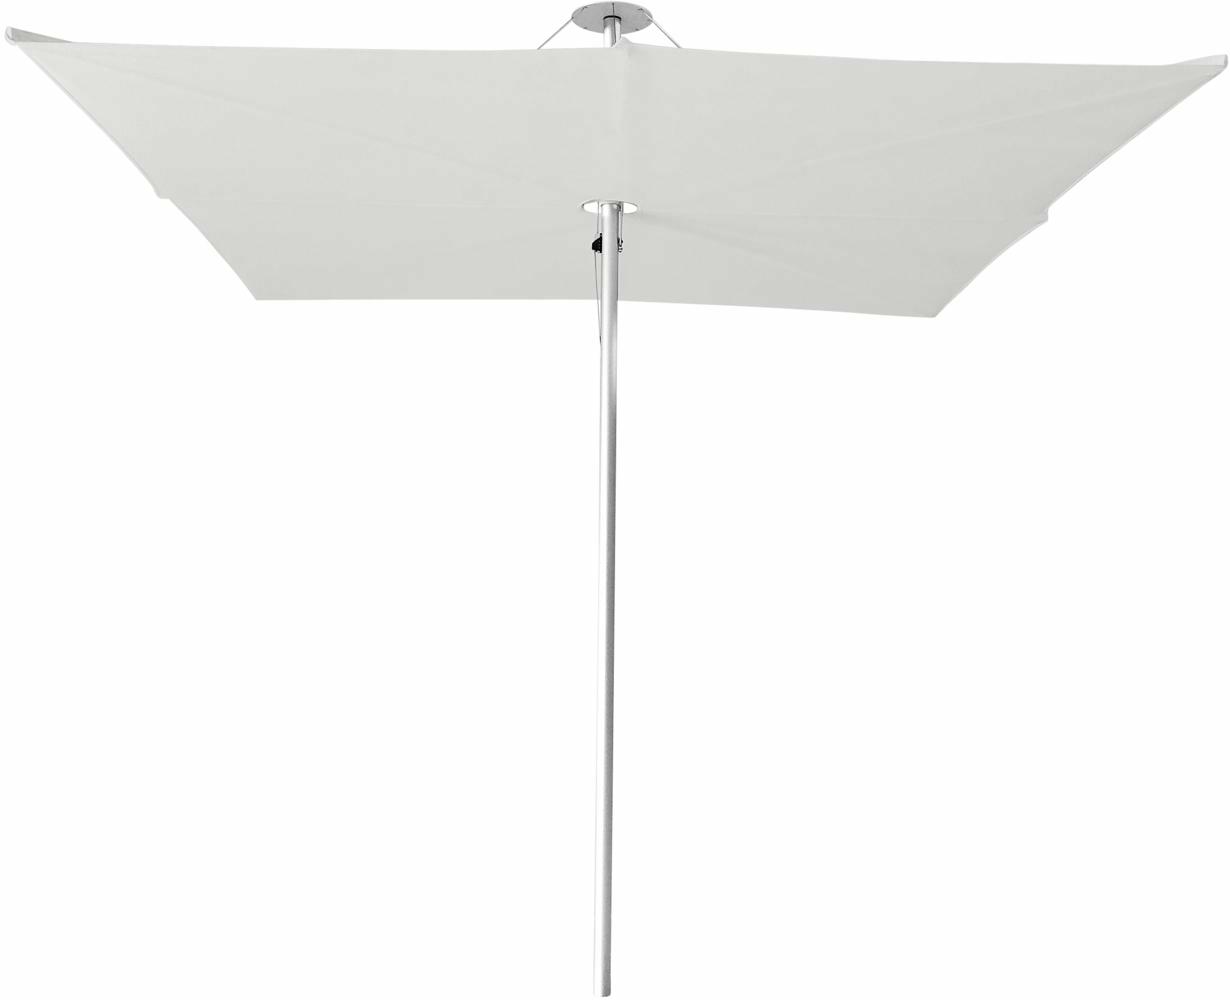 Infina center post umbrella, 3 m square, with frame in Aluminum and Solidum Canvas canopy. 